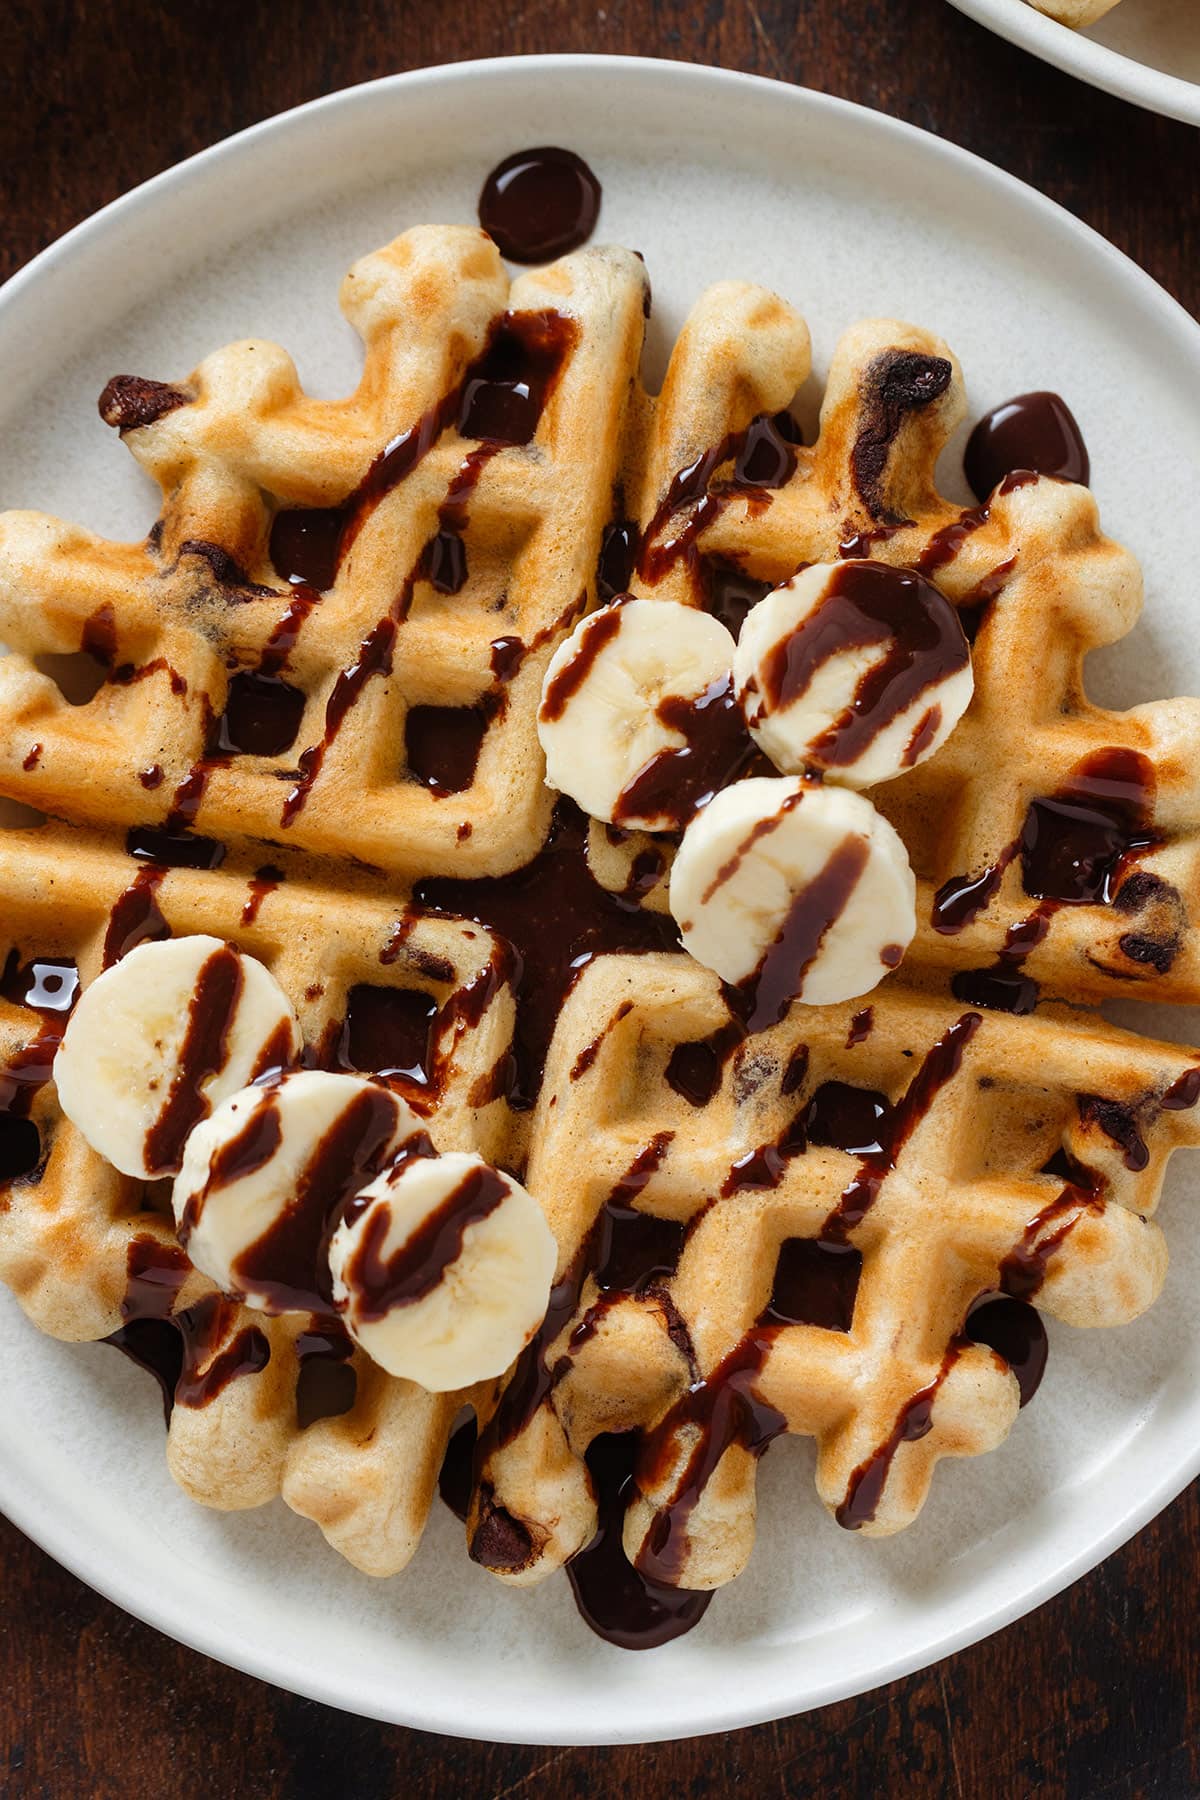 A round waffle on a white plate drizzled with chocolate sauce and maple syrup garnished with sliced banana on a wooden background.